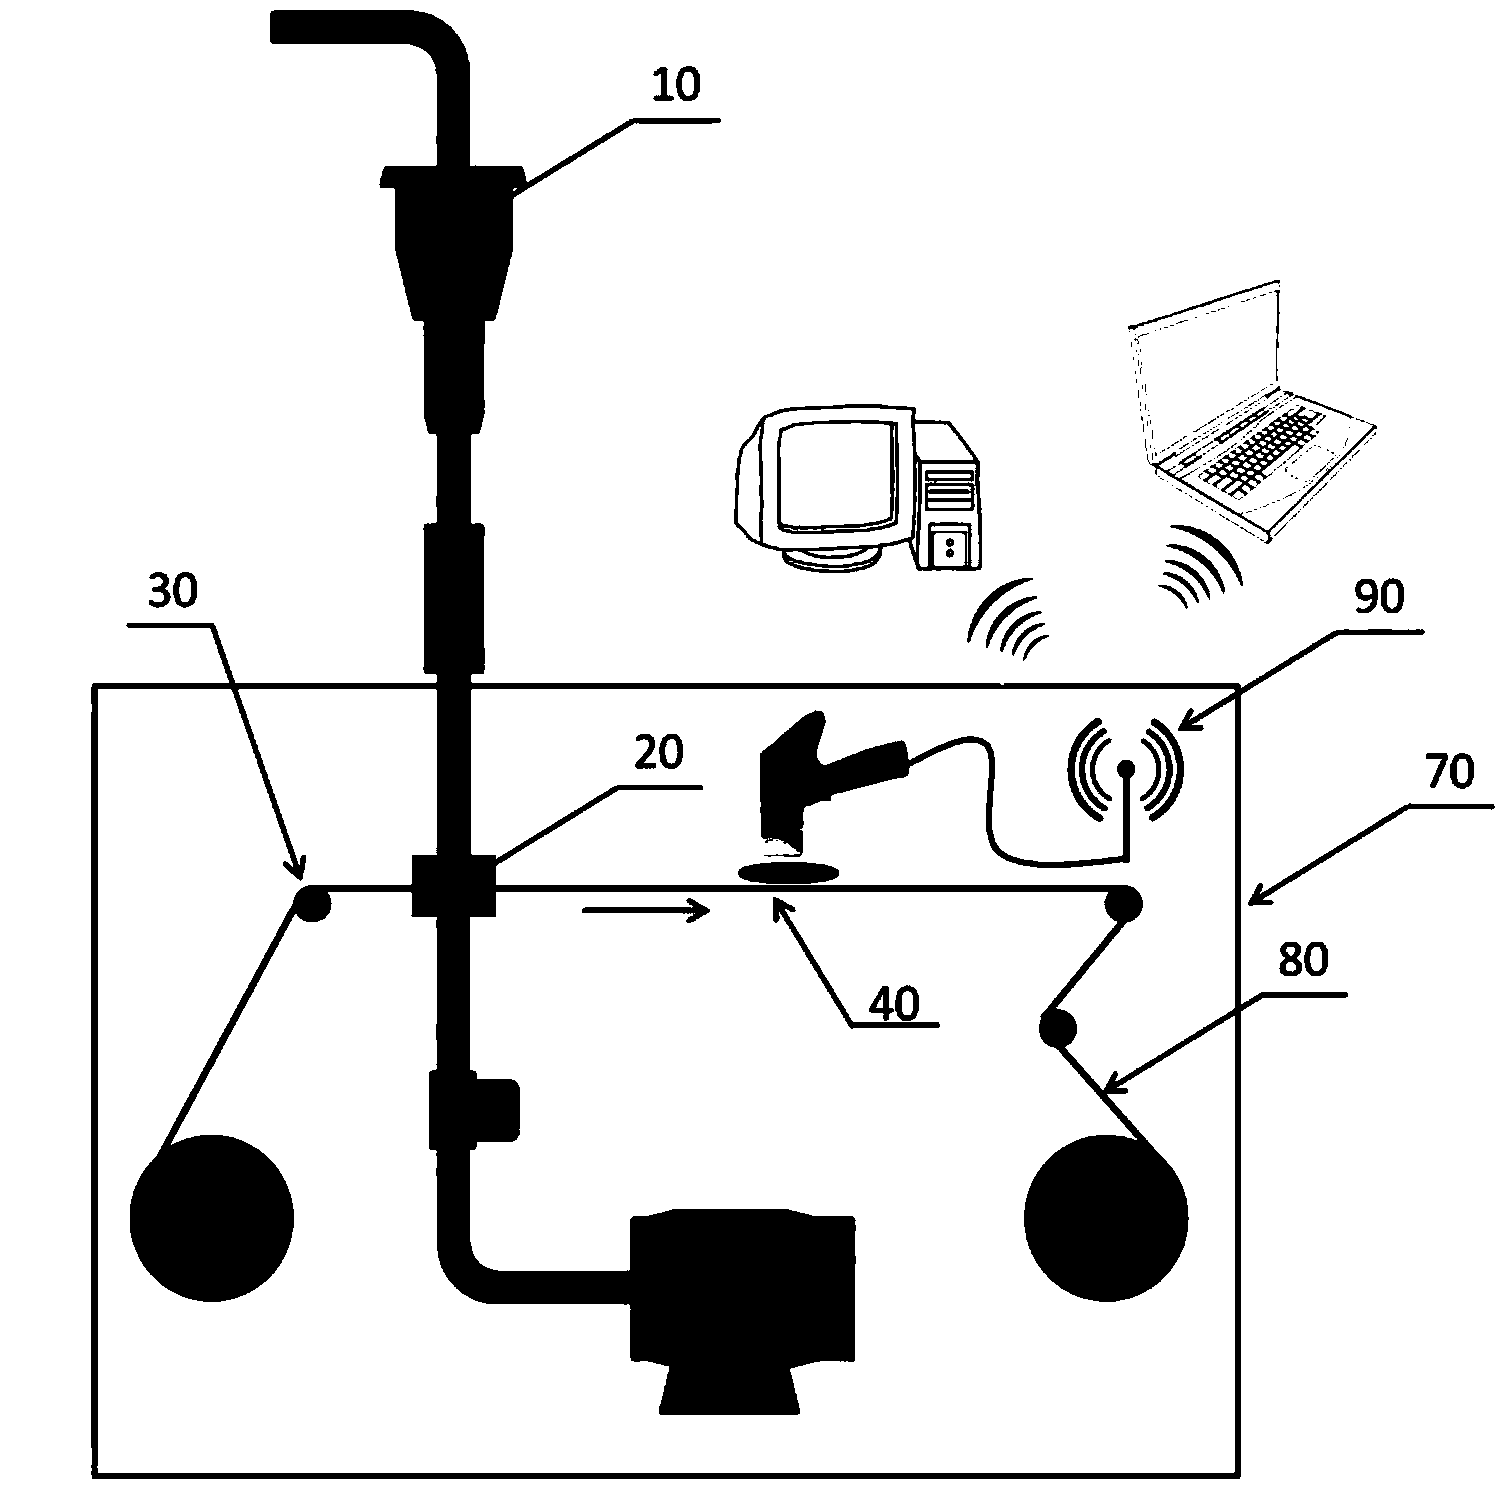 On-line detection device and method for heavy metal content in flue gas